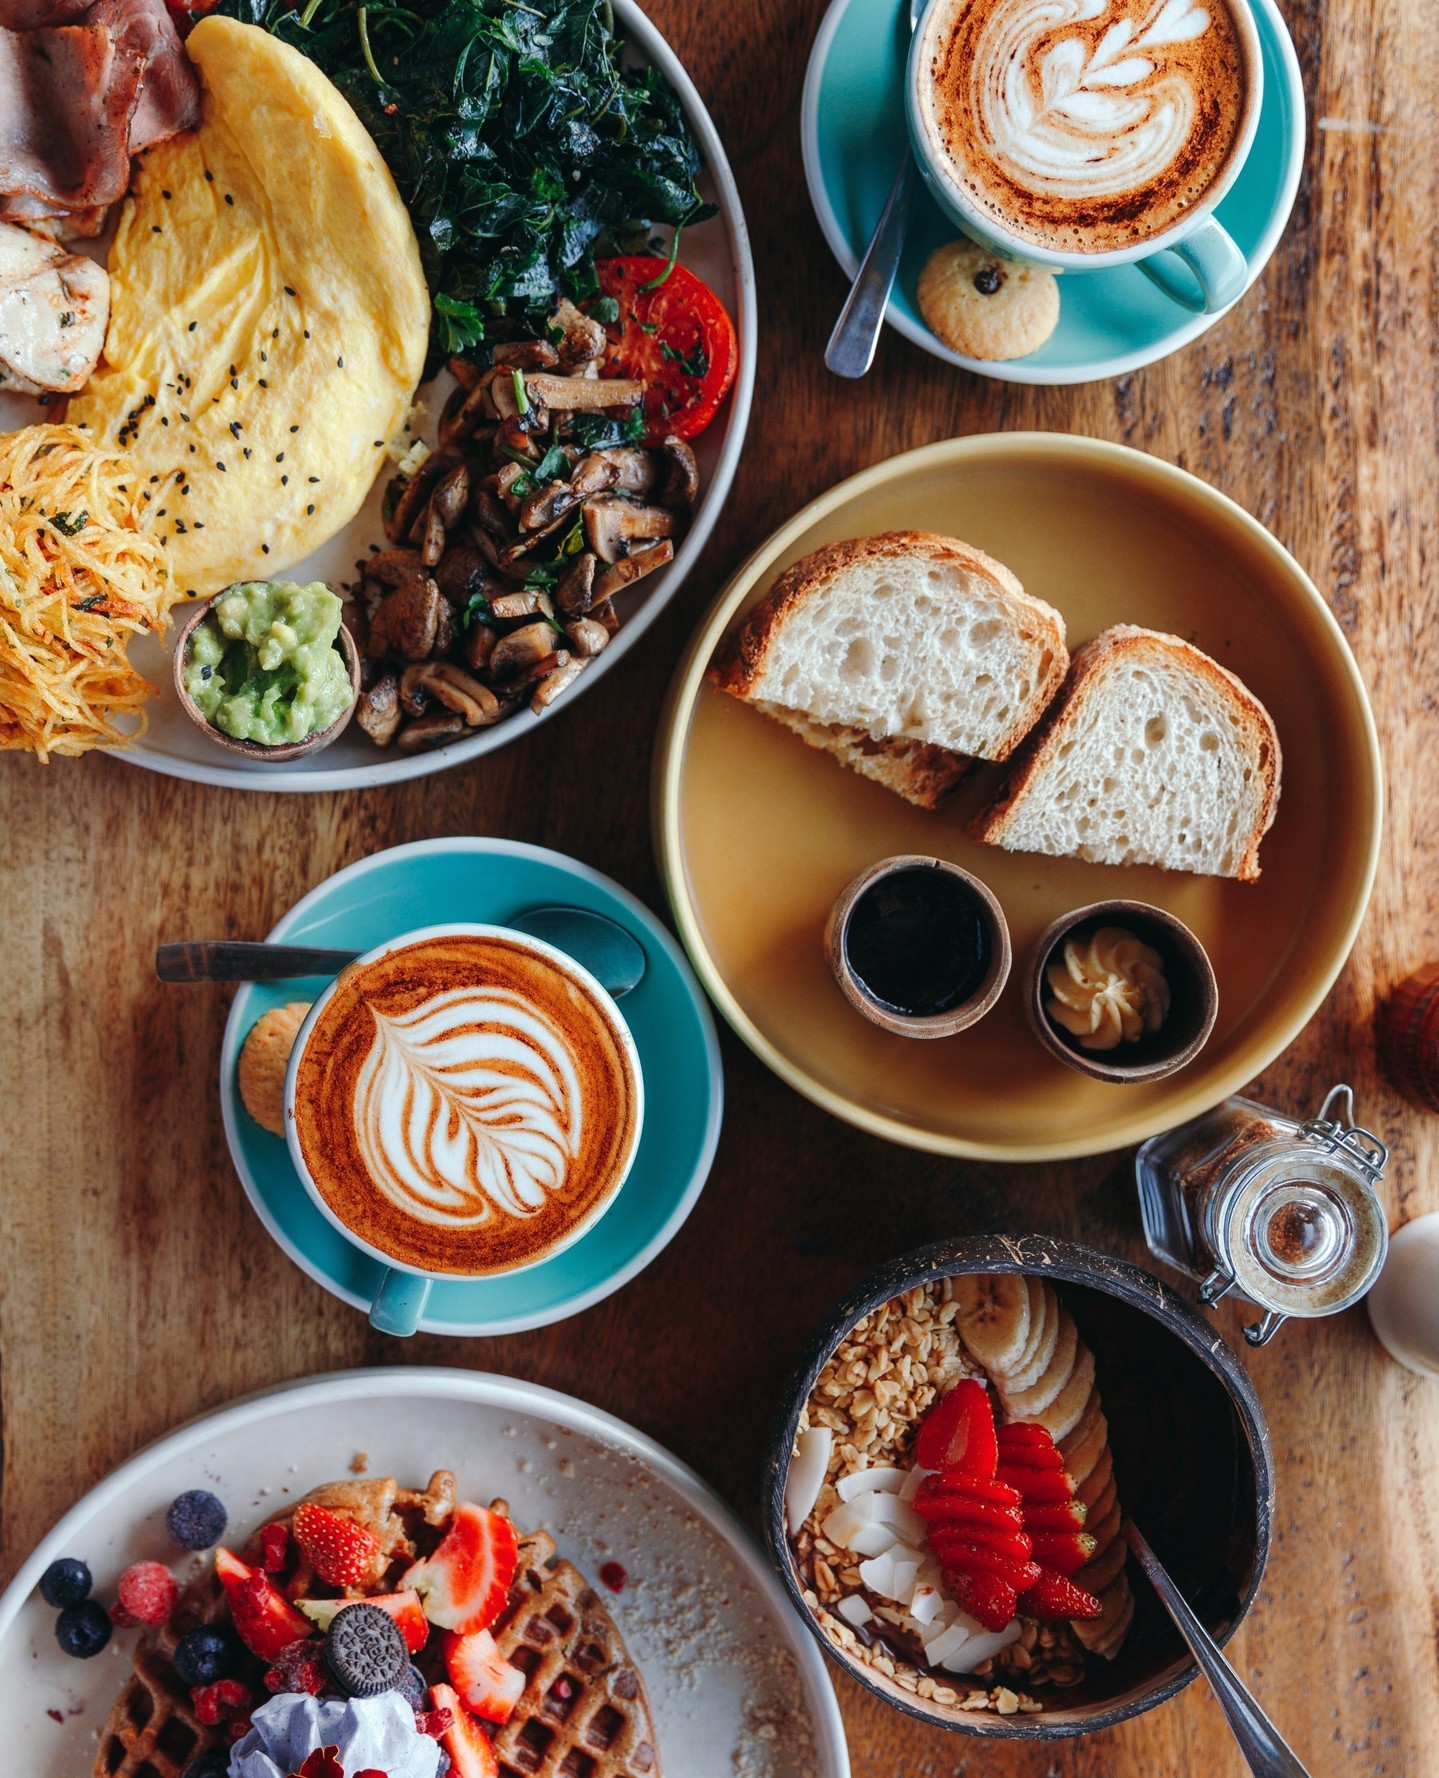 5 Best Seattle Brunch Spots to Try This Summer 🥞 The Pacific Northwest is home to some of the most crave-worthy food in the entire United States. So, it comes as no surprise that Seattle has evolved into a brunch haven of its own, too. From a shareable lamb chop burger to cereal-encrusted French toast, Seattle has no shortage of decadent brunch offerings that are sure to cater to every foodie and breakfast-lover, alike. Check out our list of brunch spots to try this summer at FabulousCalifornia.com.